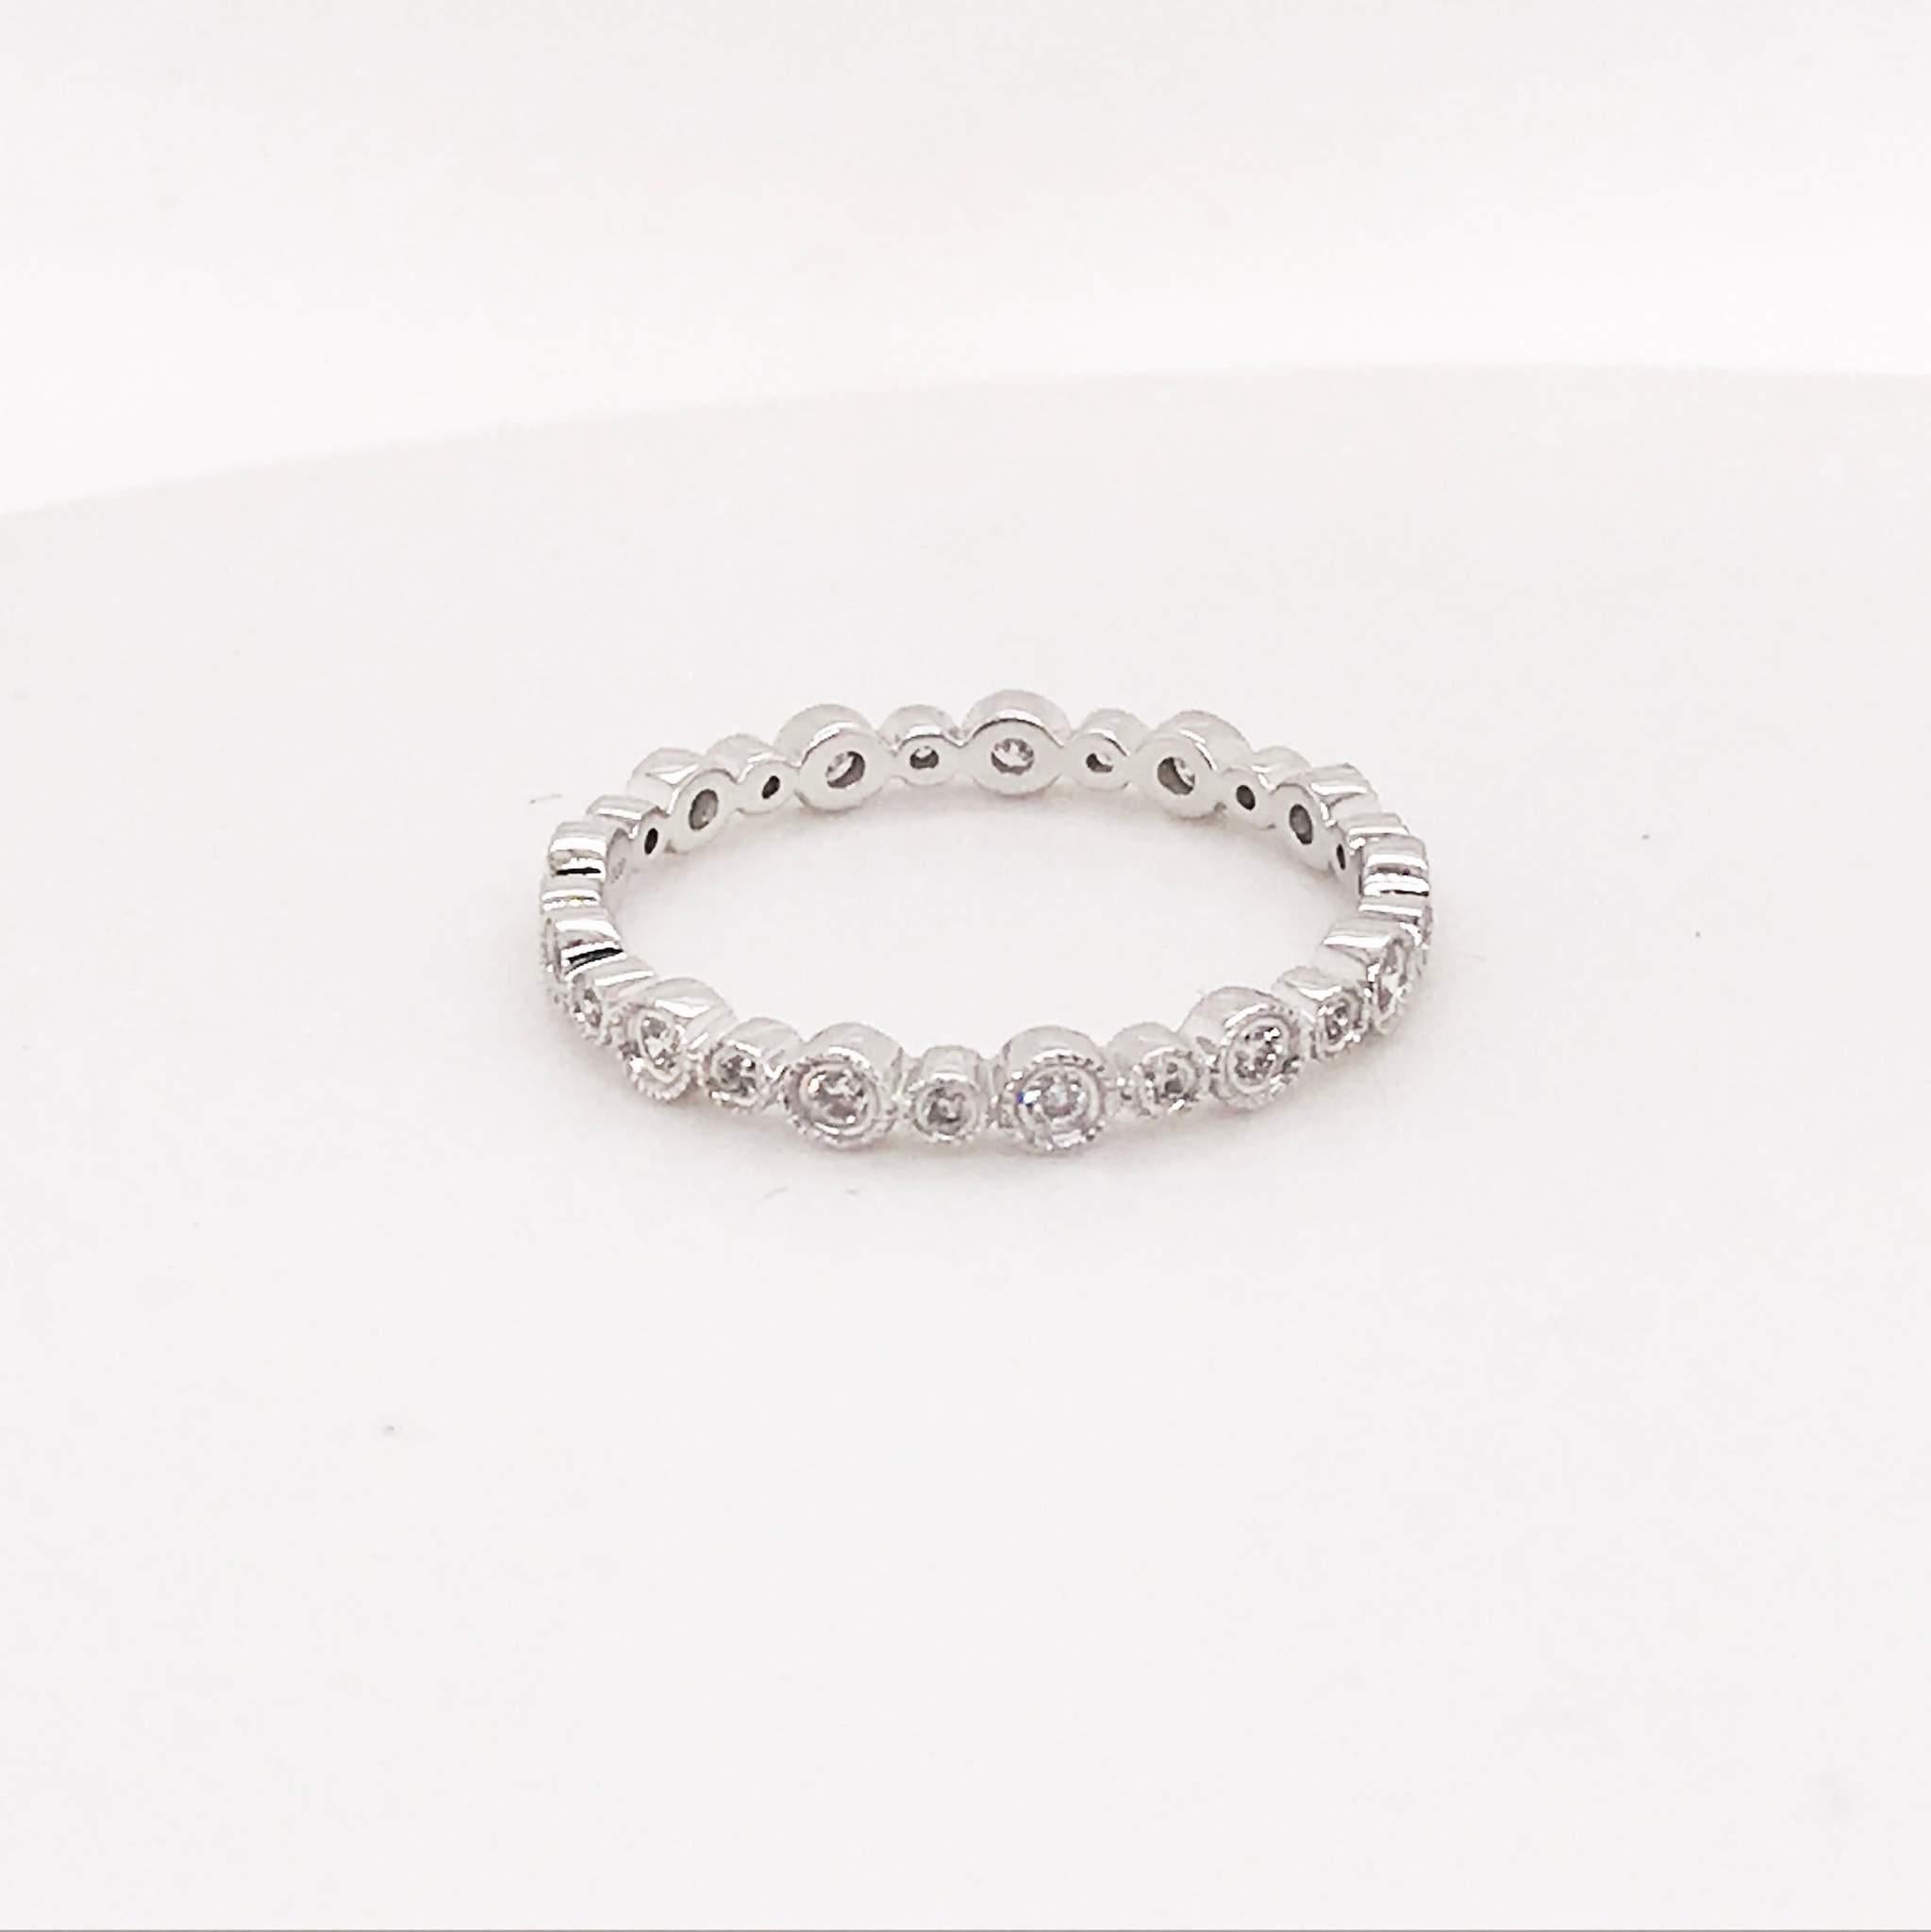 Diamond bubble band with round brilliant diamonds! This band is 14k white gold with bright white diamonds set in two different bezel sizes for an alternating bubble design. The diamond band design resembles champagne bubbles changing in size and